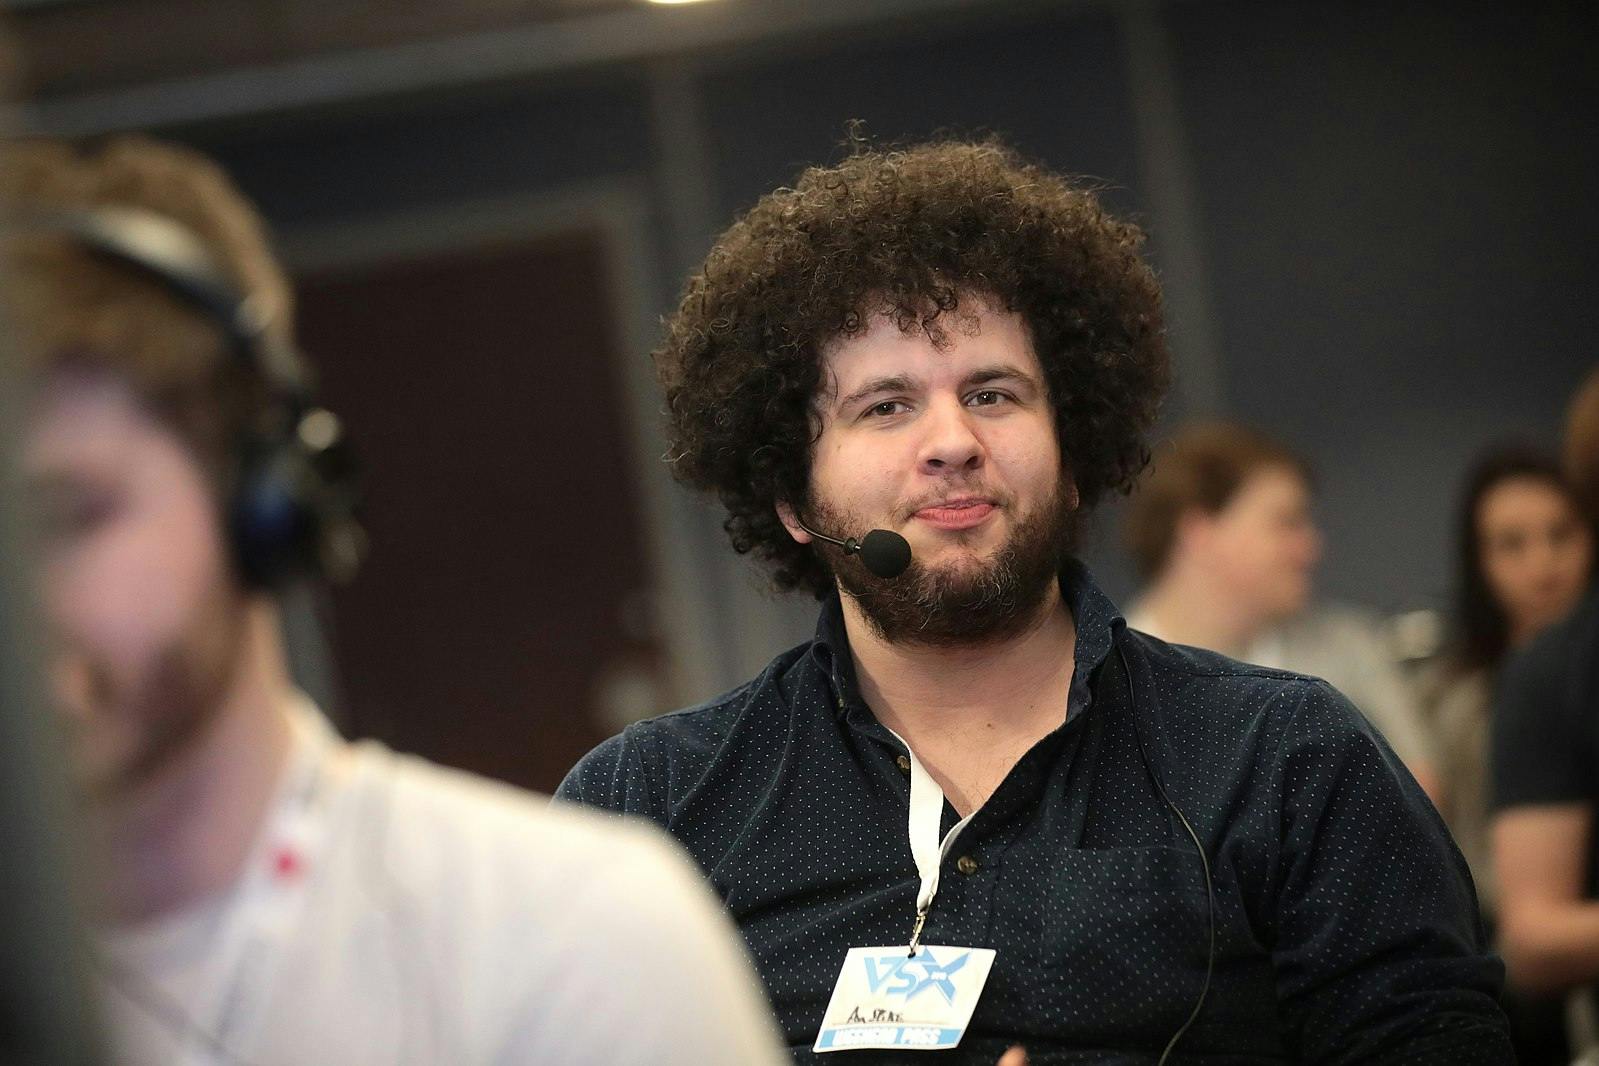 Spikevegeta, a speedrunning live streamer on YouTube, smiling at a convention in 2019.
